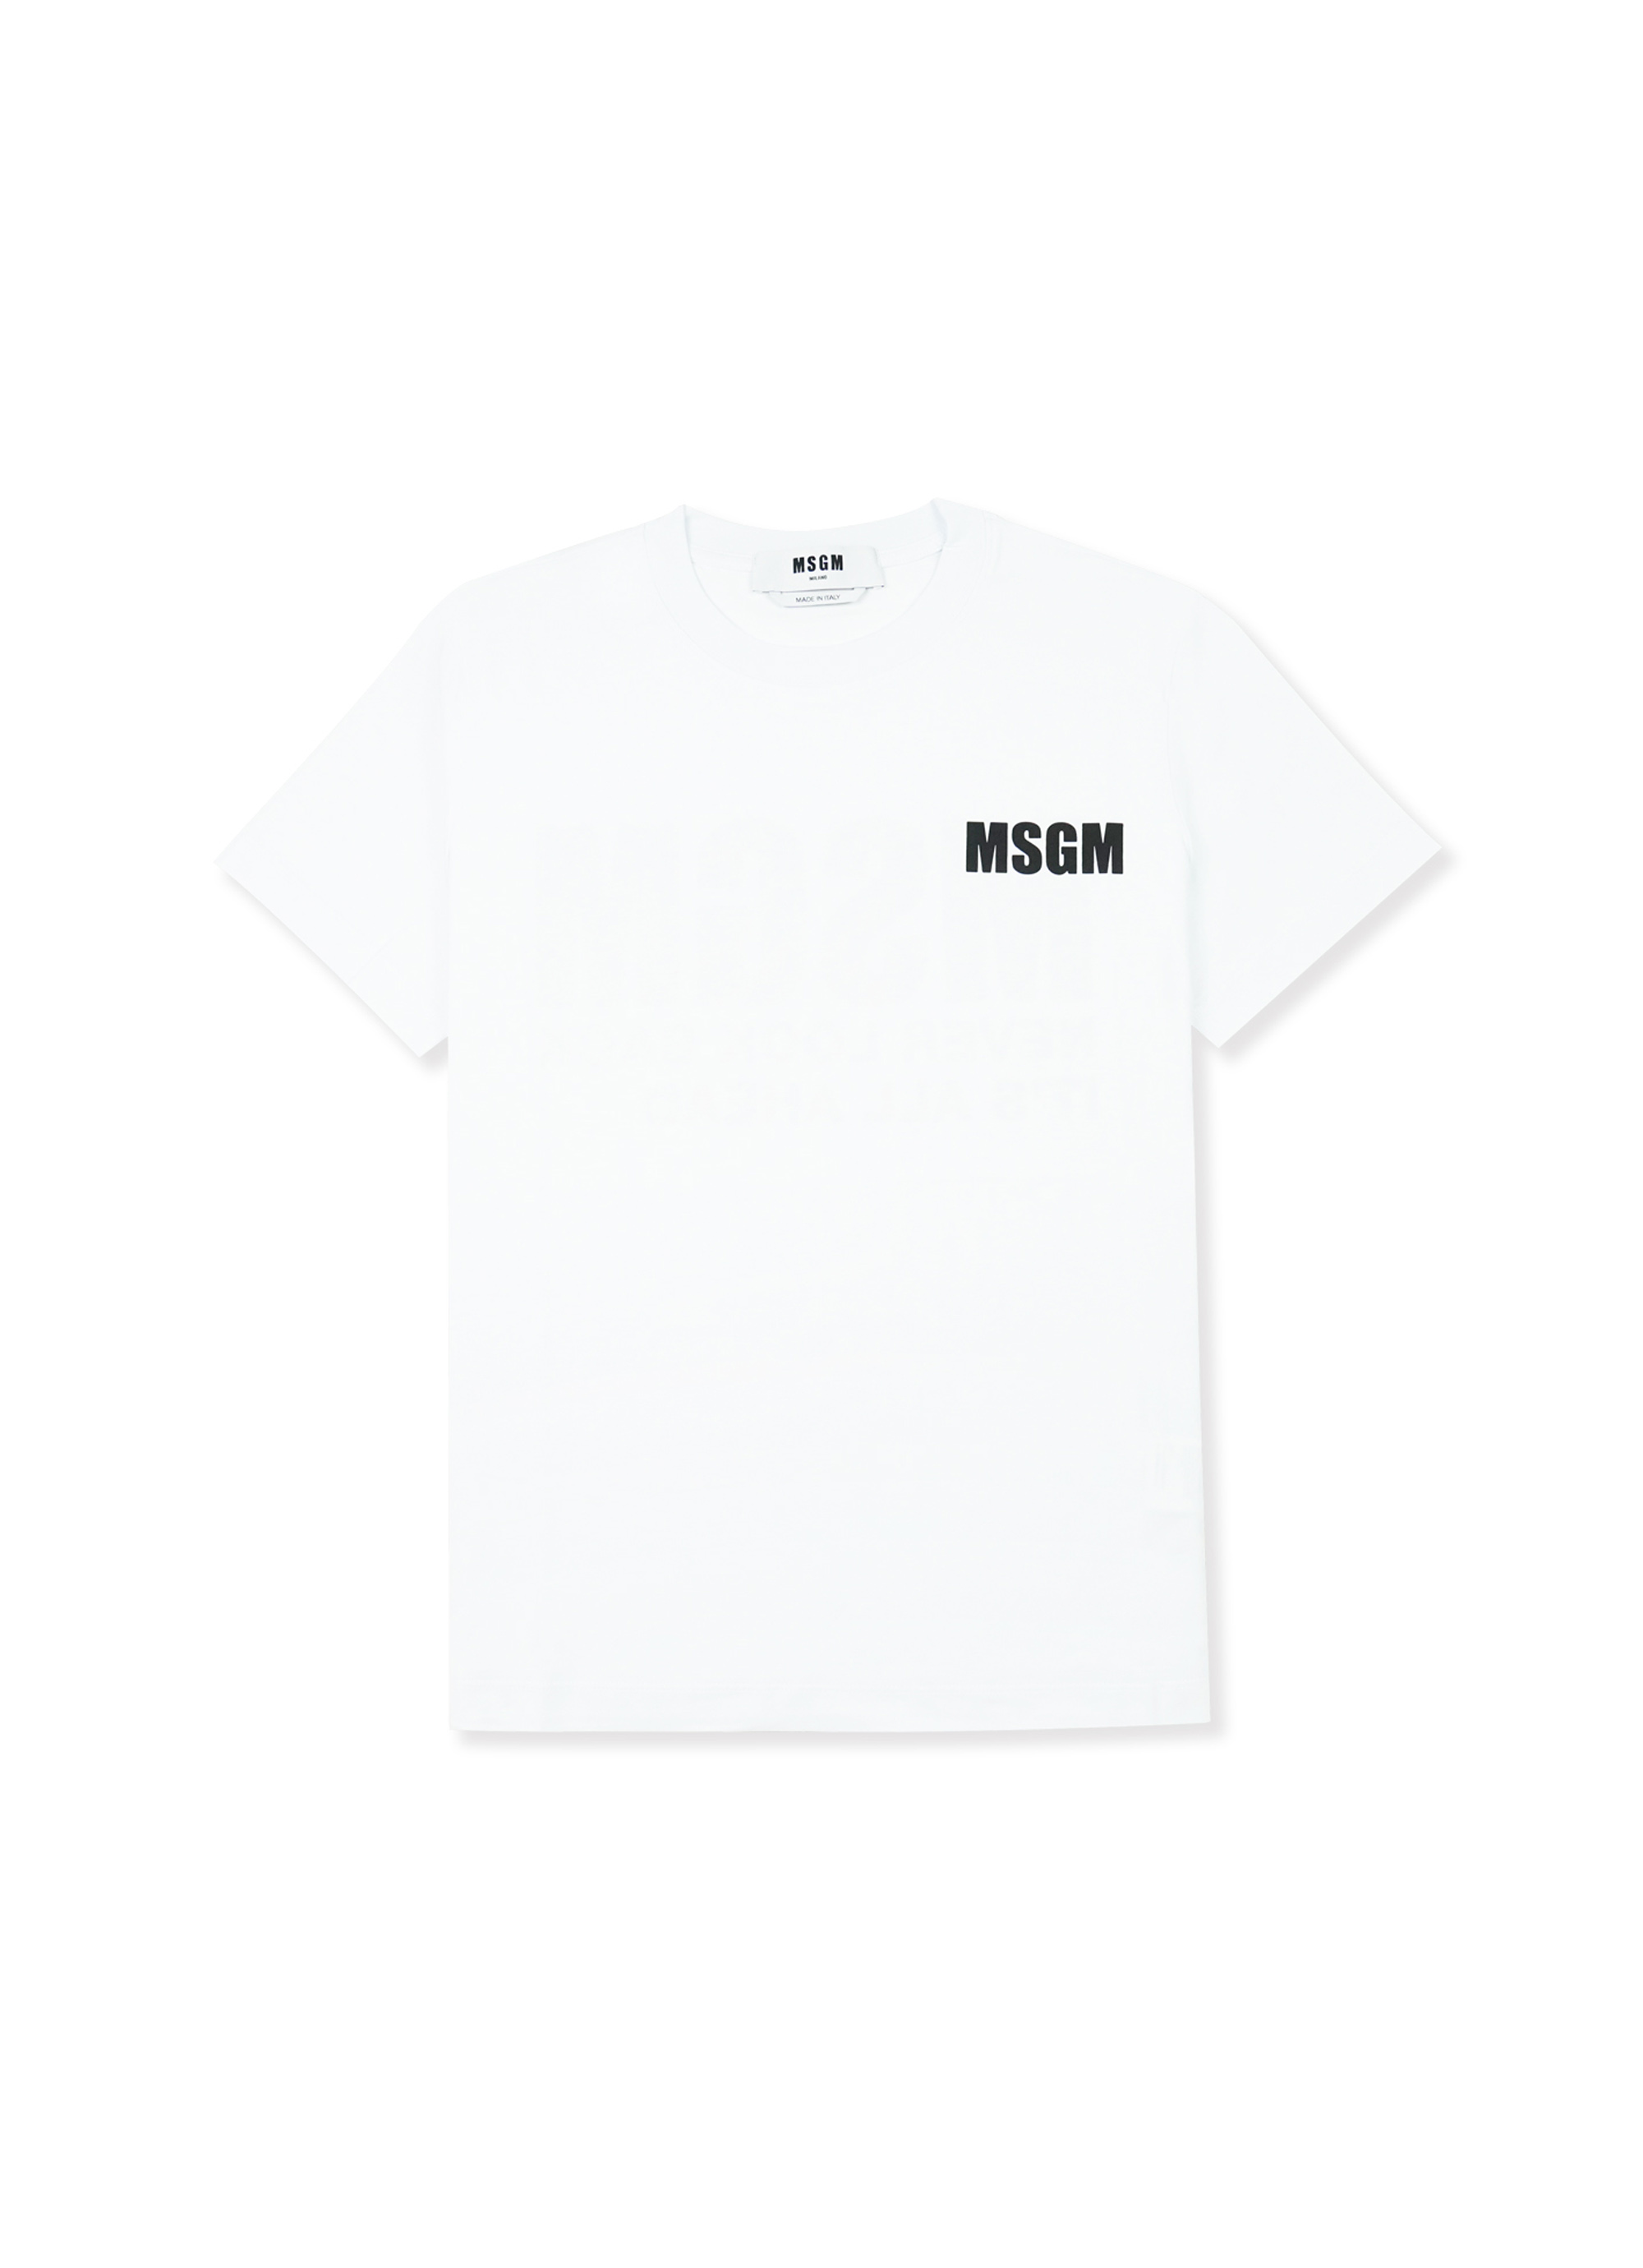 MSGM】 【NEVER LOOK BACK ステートメントロゴTシャツ】｜aoi公式